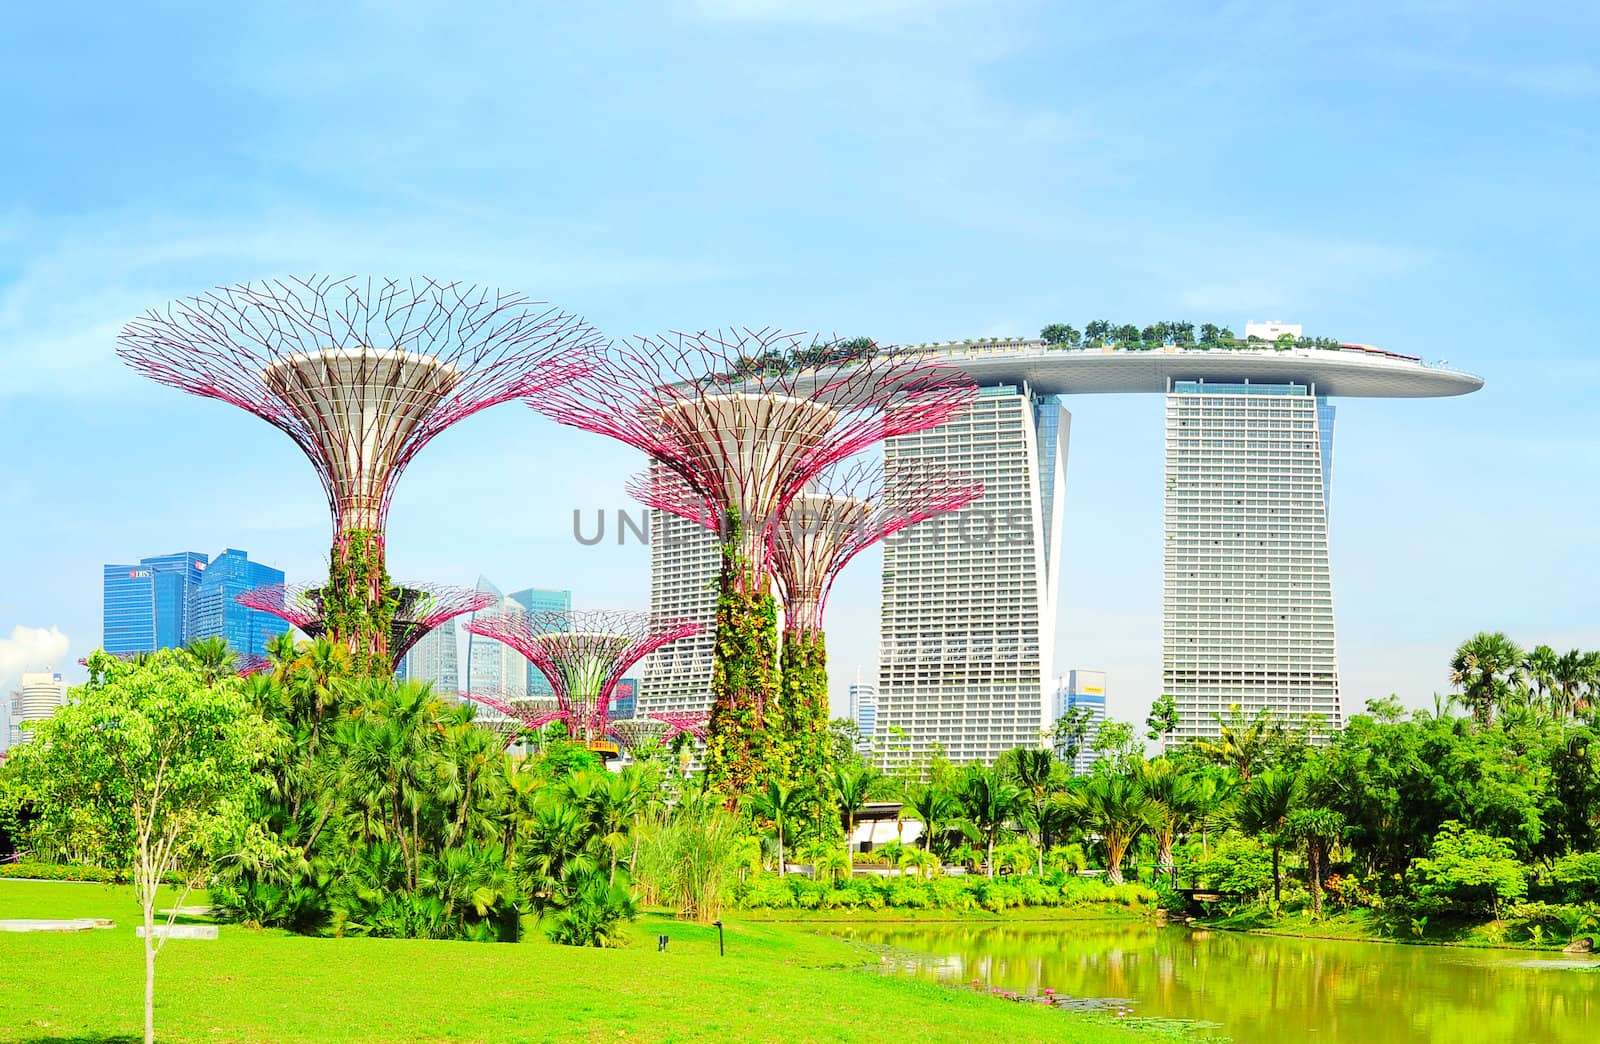 Singapore, Republic of Singapore - May 09, 2013: Panoramic view of Gardens by the Bay in Singapore. Gardens by the Bay was crowned World Building of the Year at the World Architecture Festival 2012 